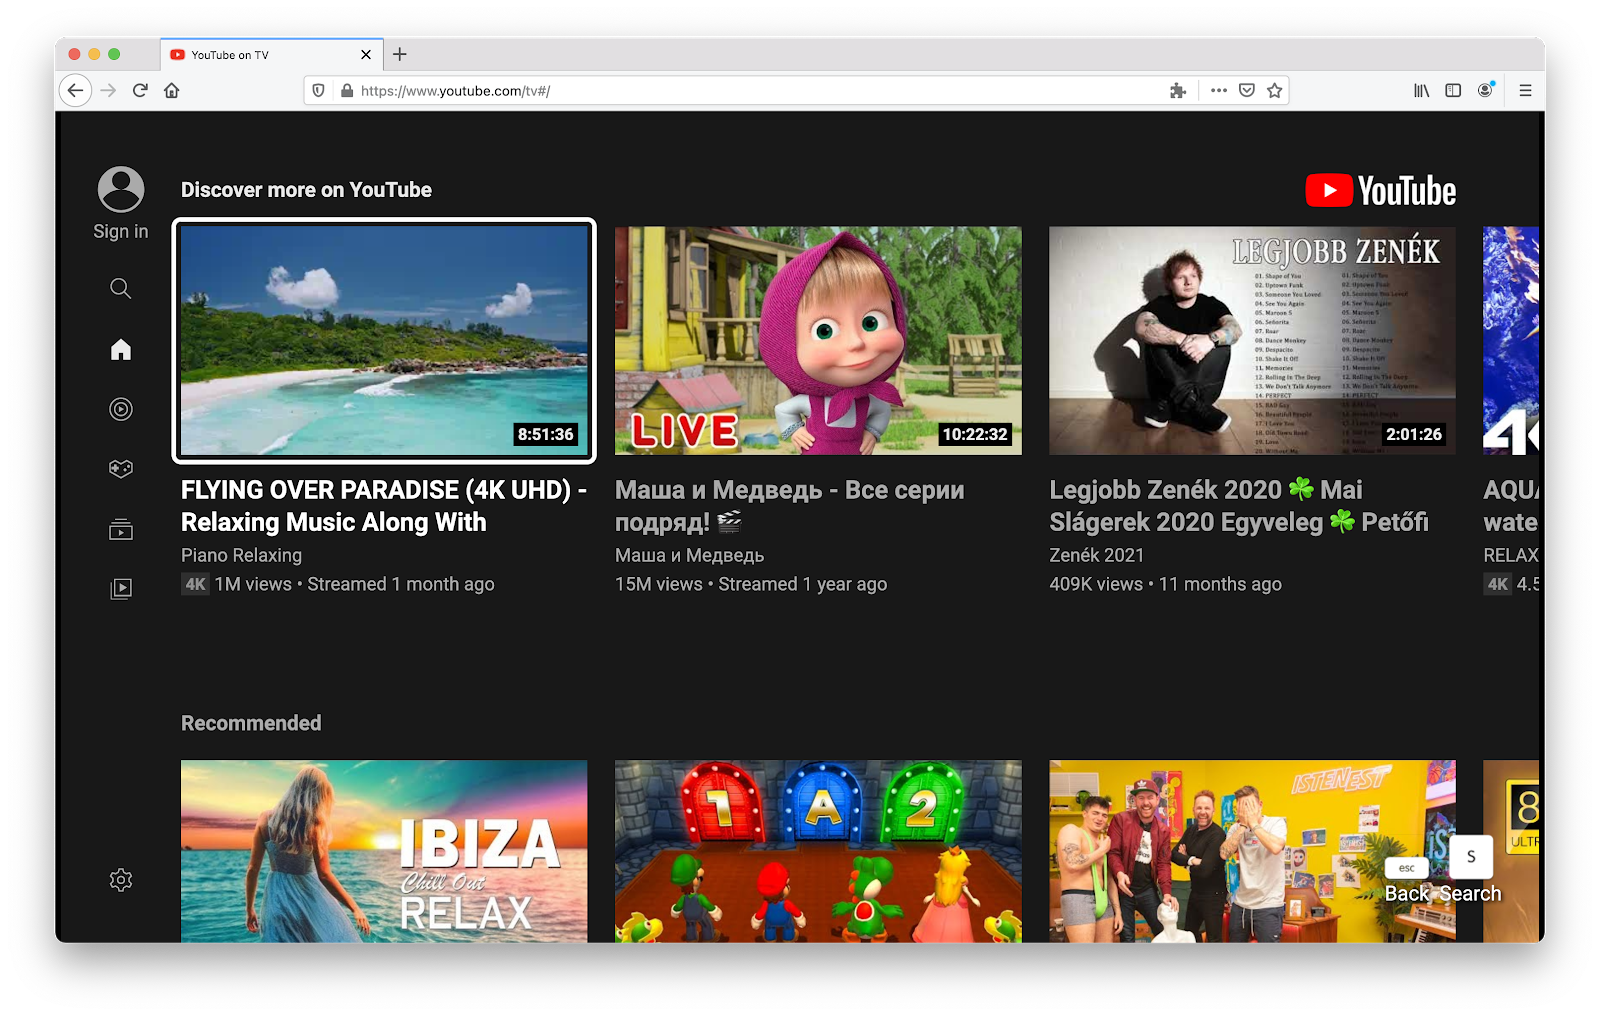 The YouTube TV page, loaded successfully in Firefox